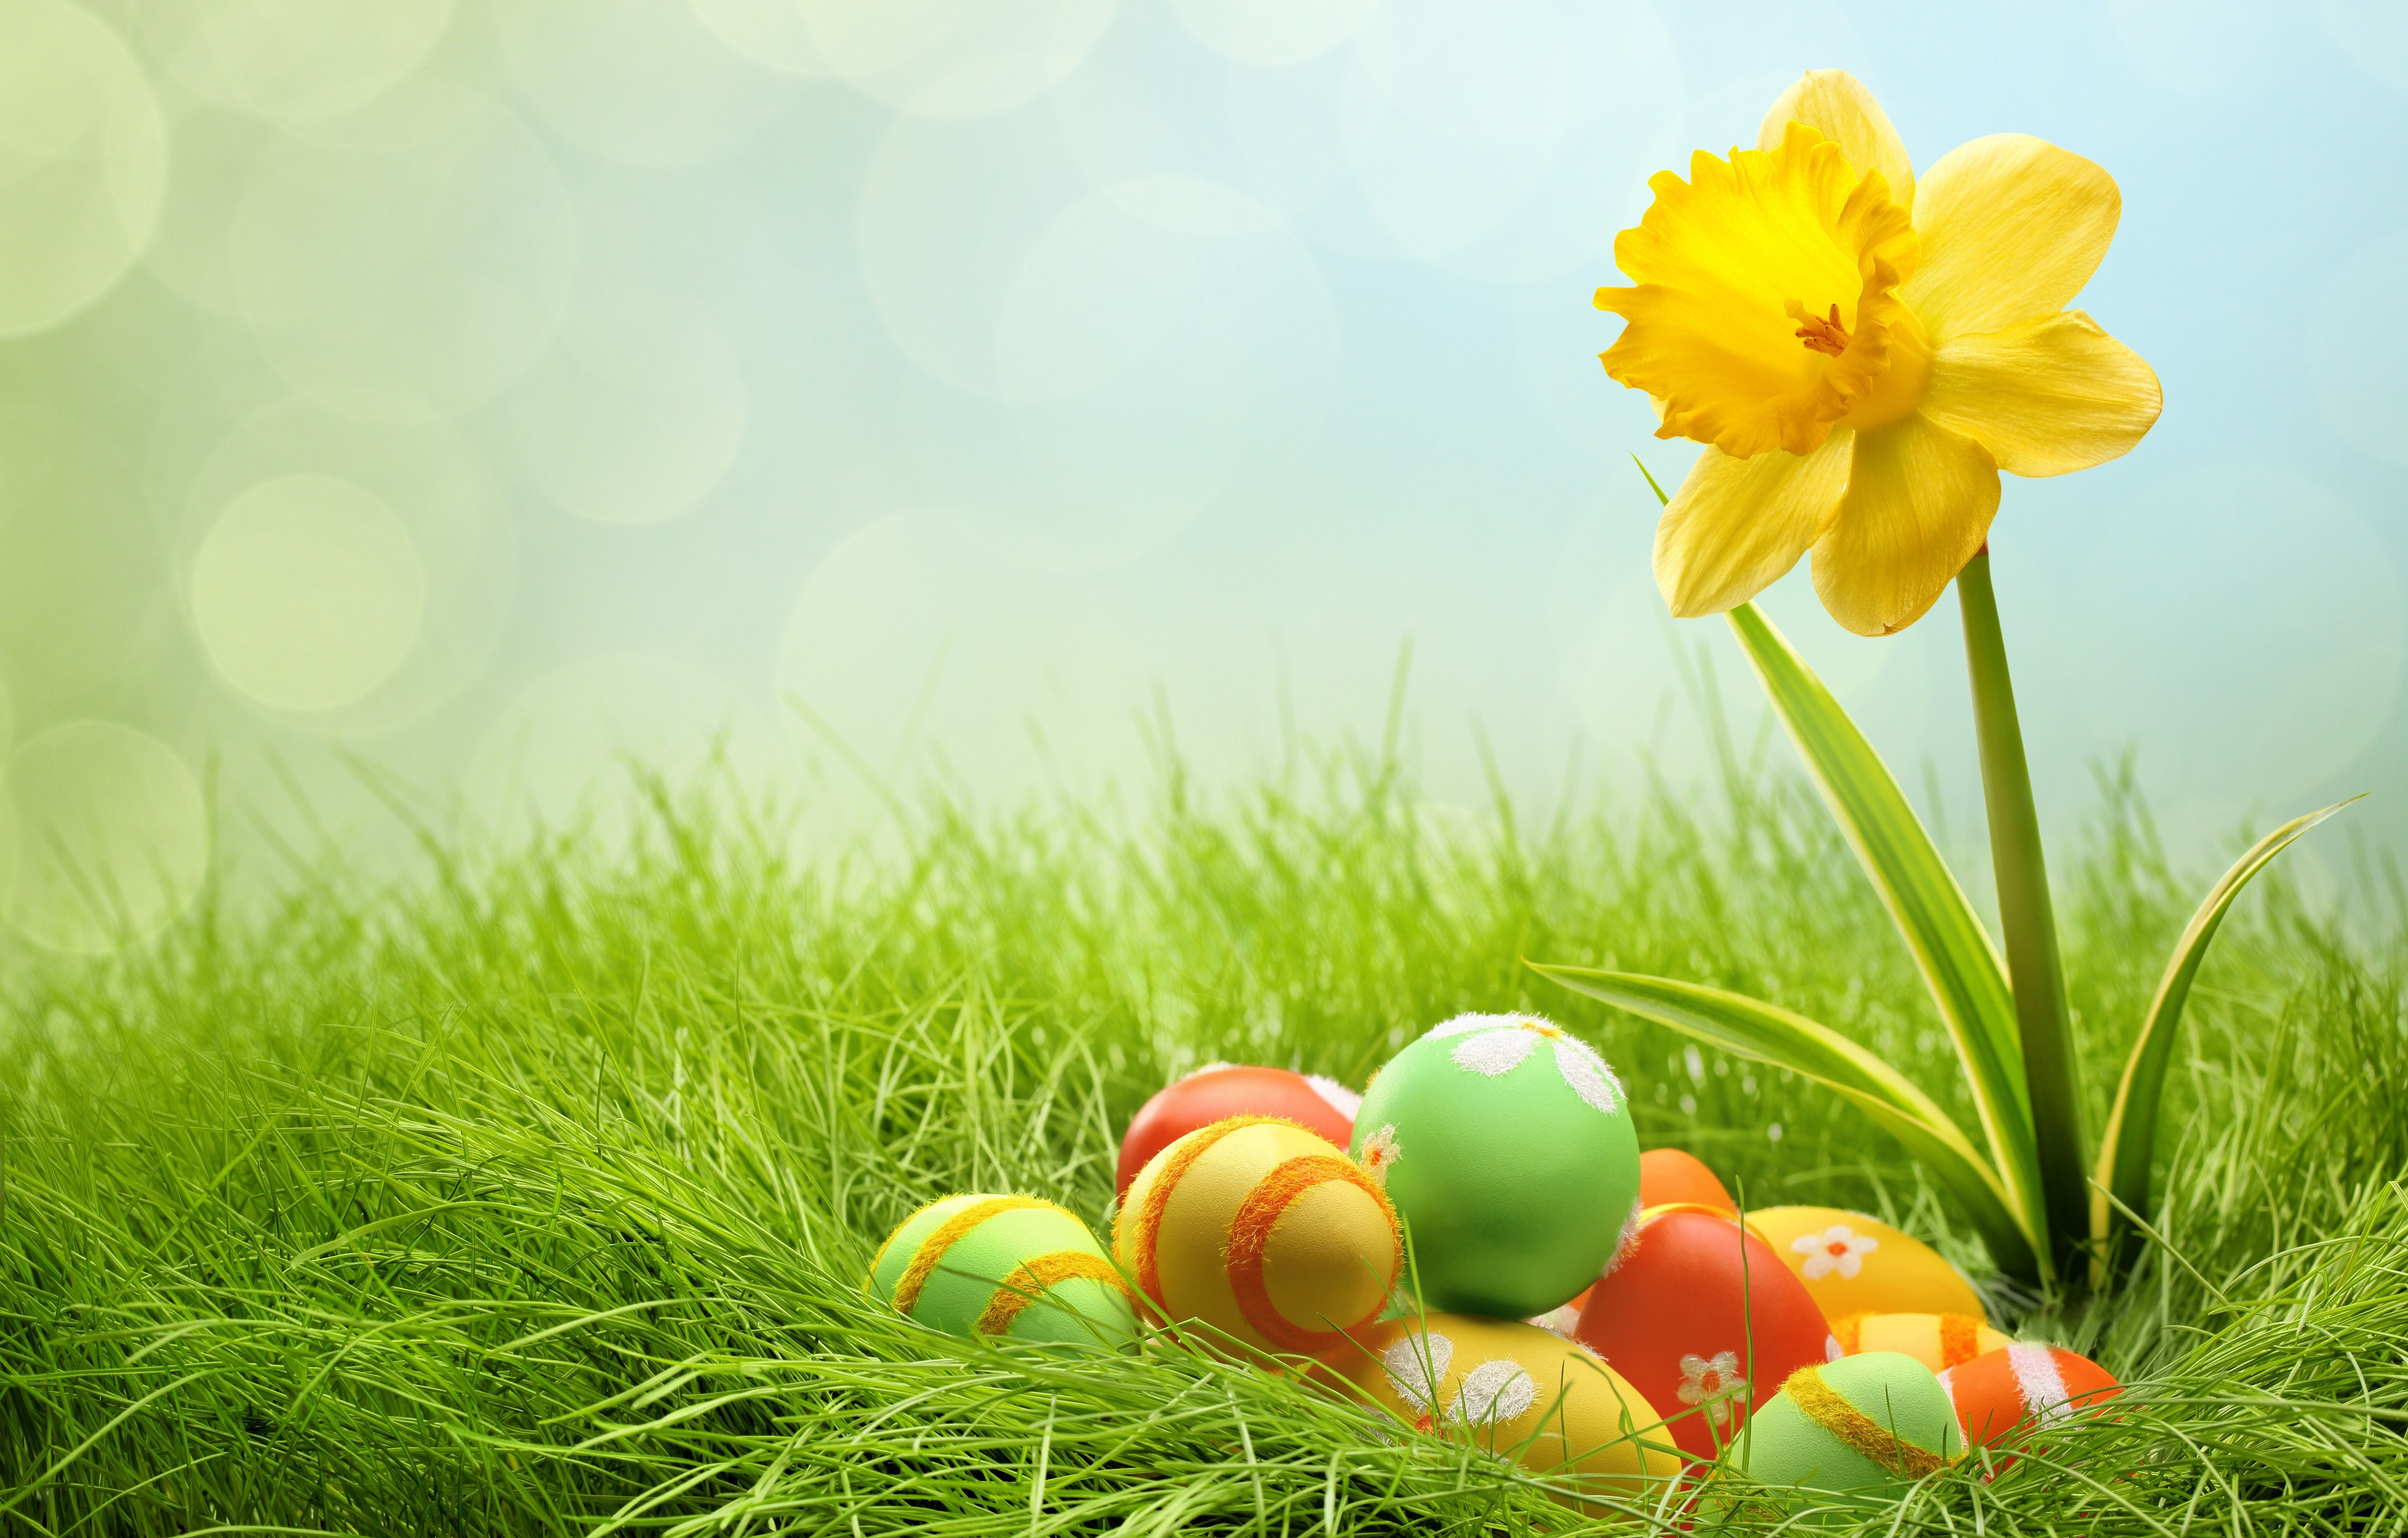 20 Excellent desktop backgrounds easter You Can Download It At No Cost ...